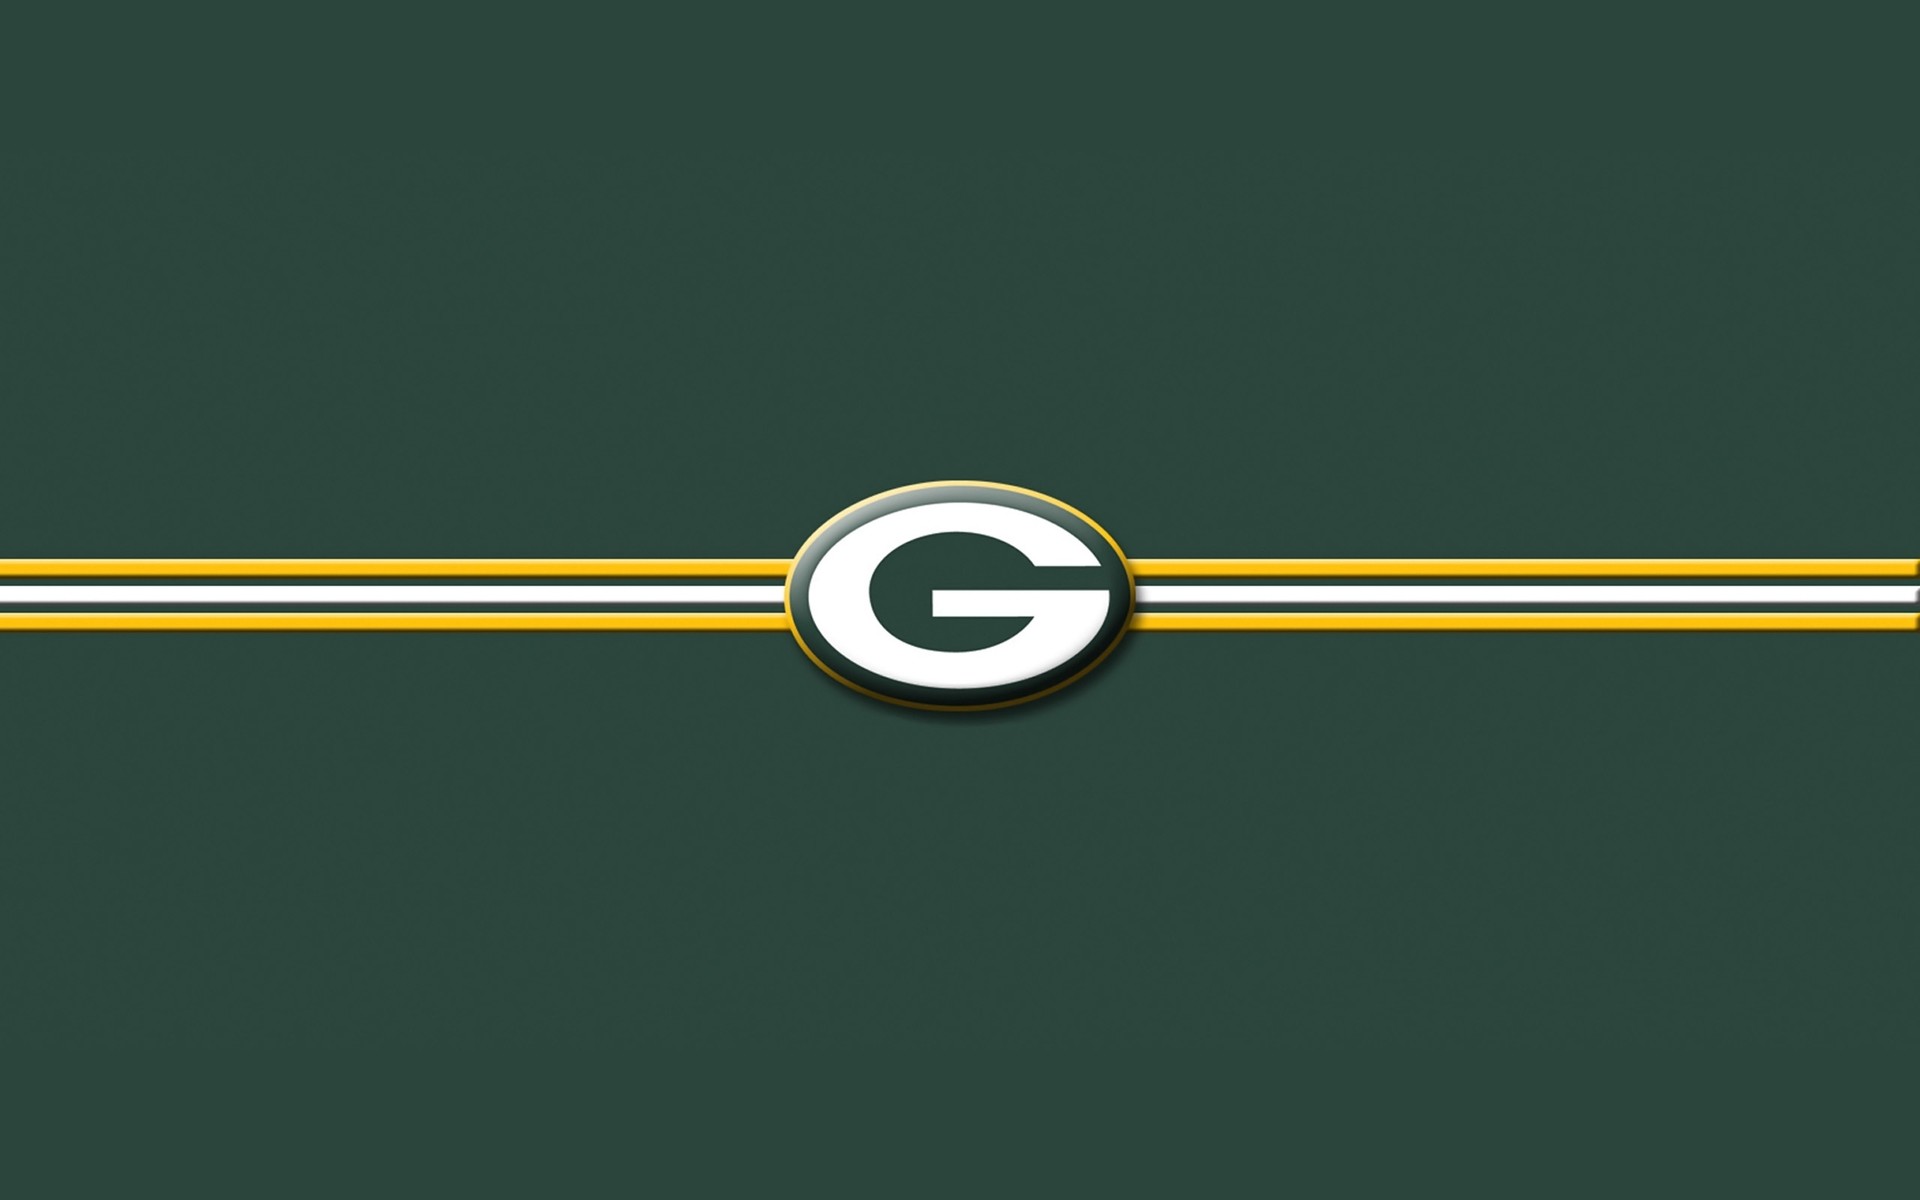 1920x1200 Green Bay Packers Wall.